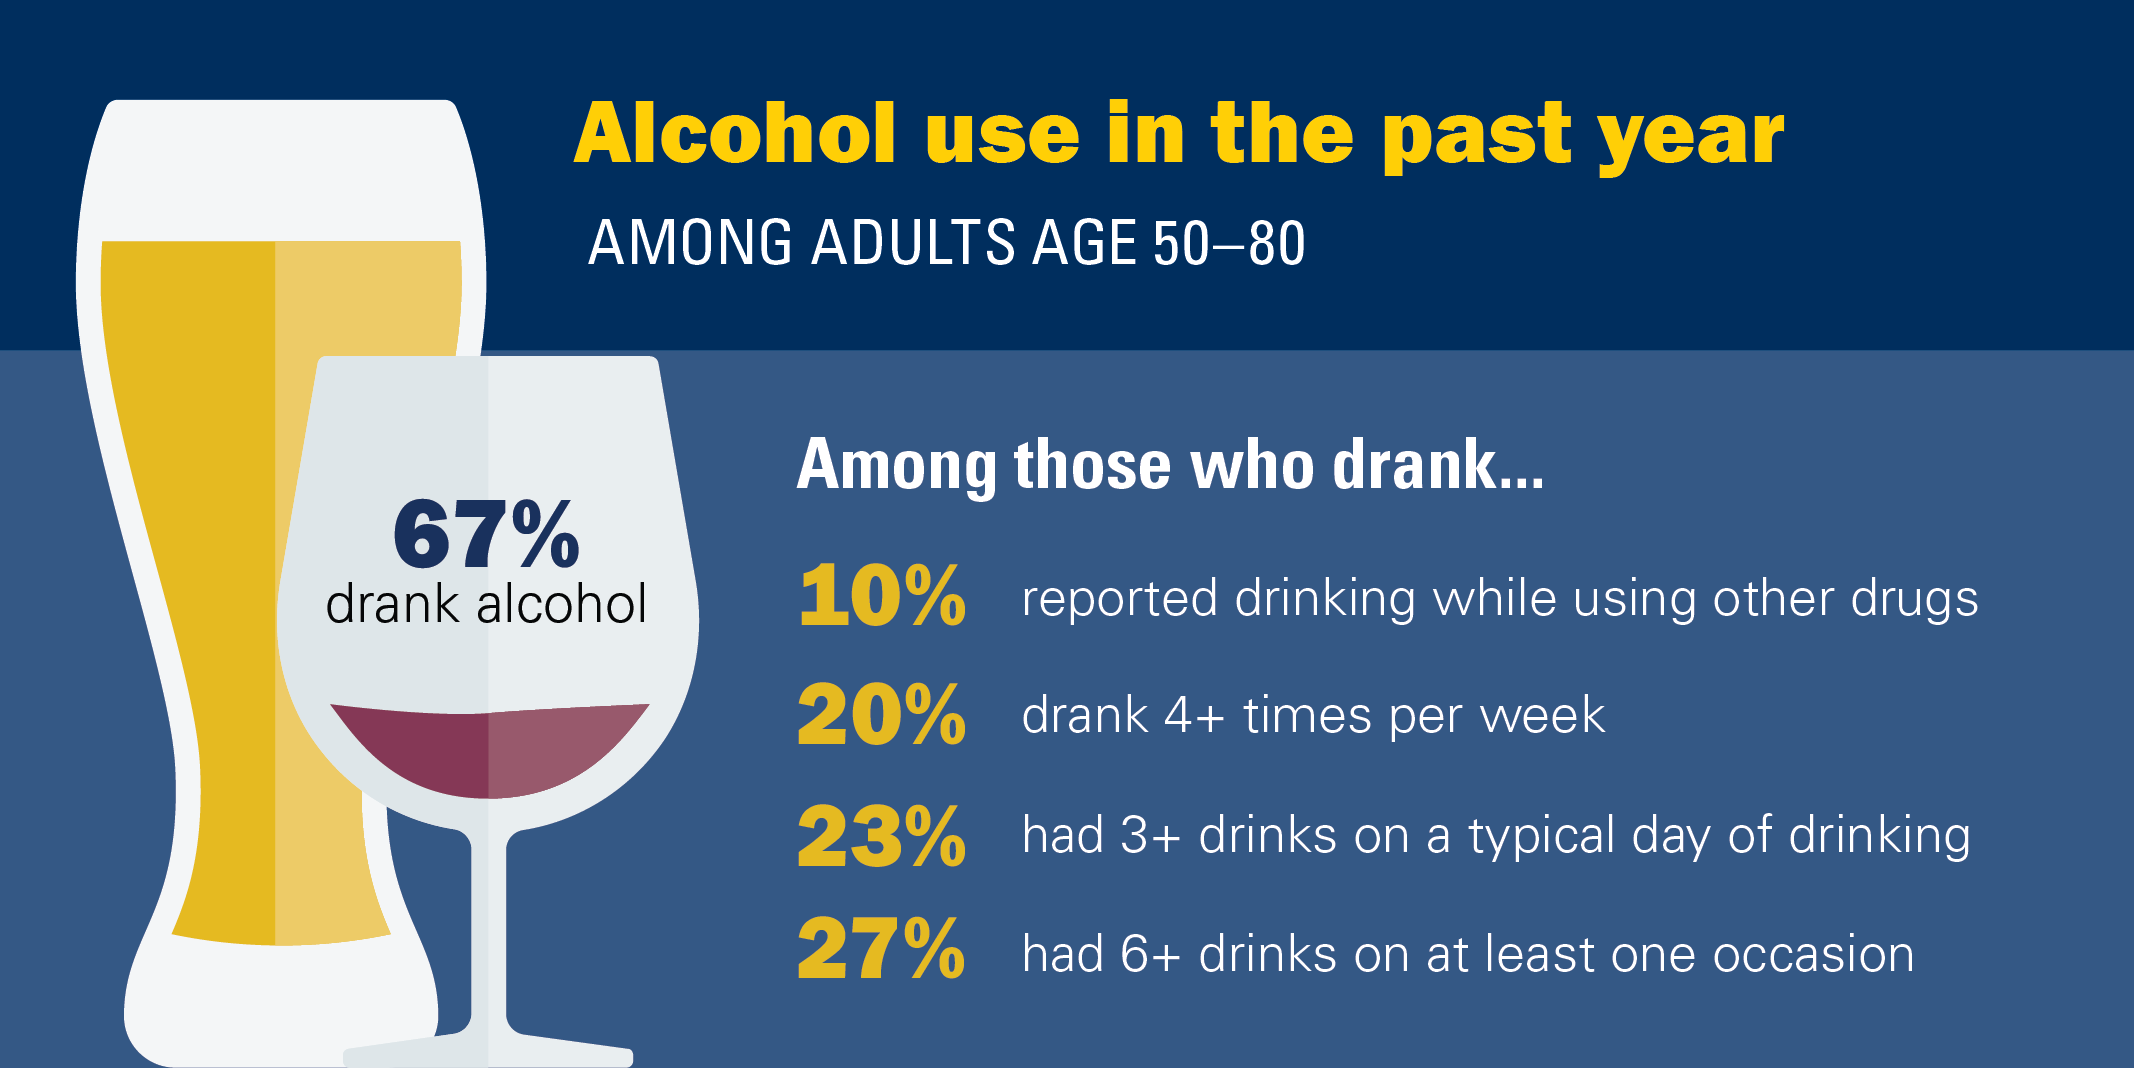 Alcohol use in the past year among adults age 50-80